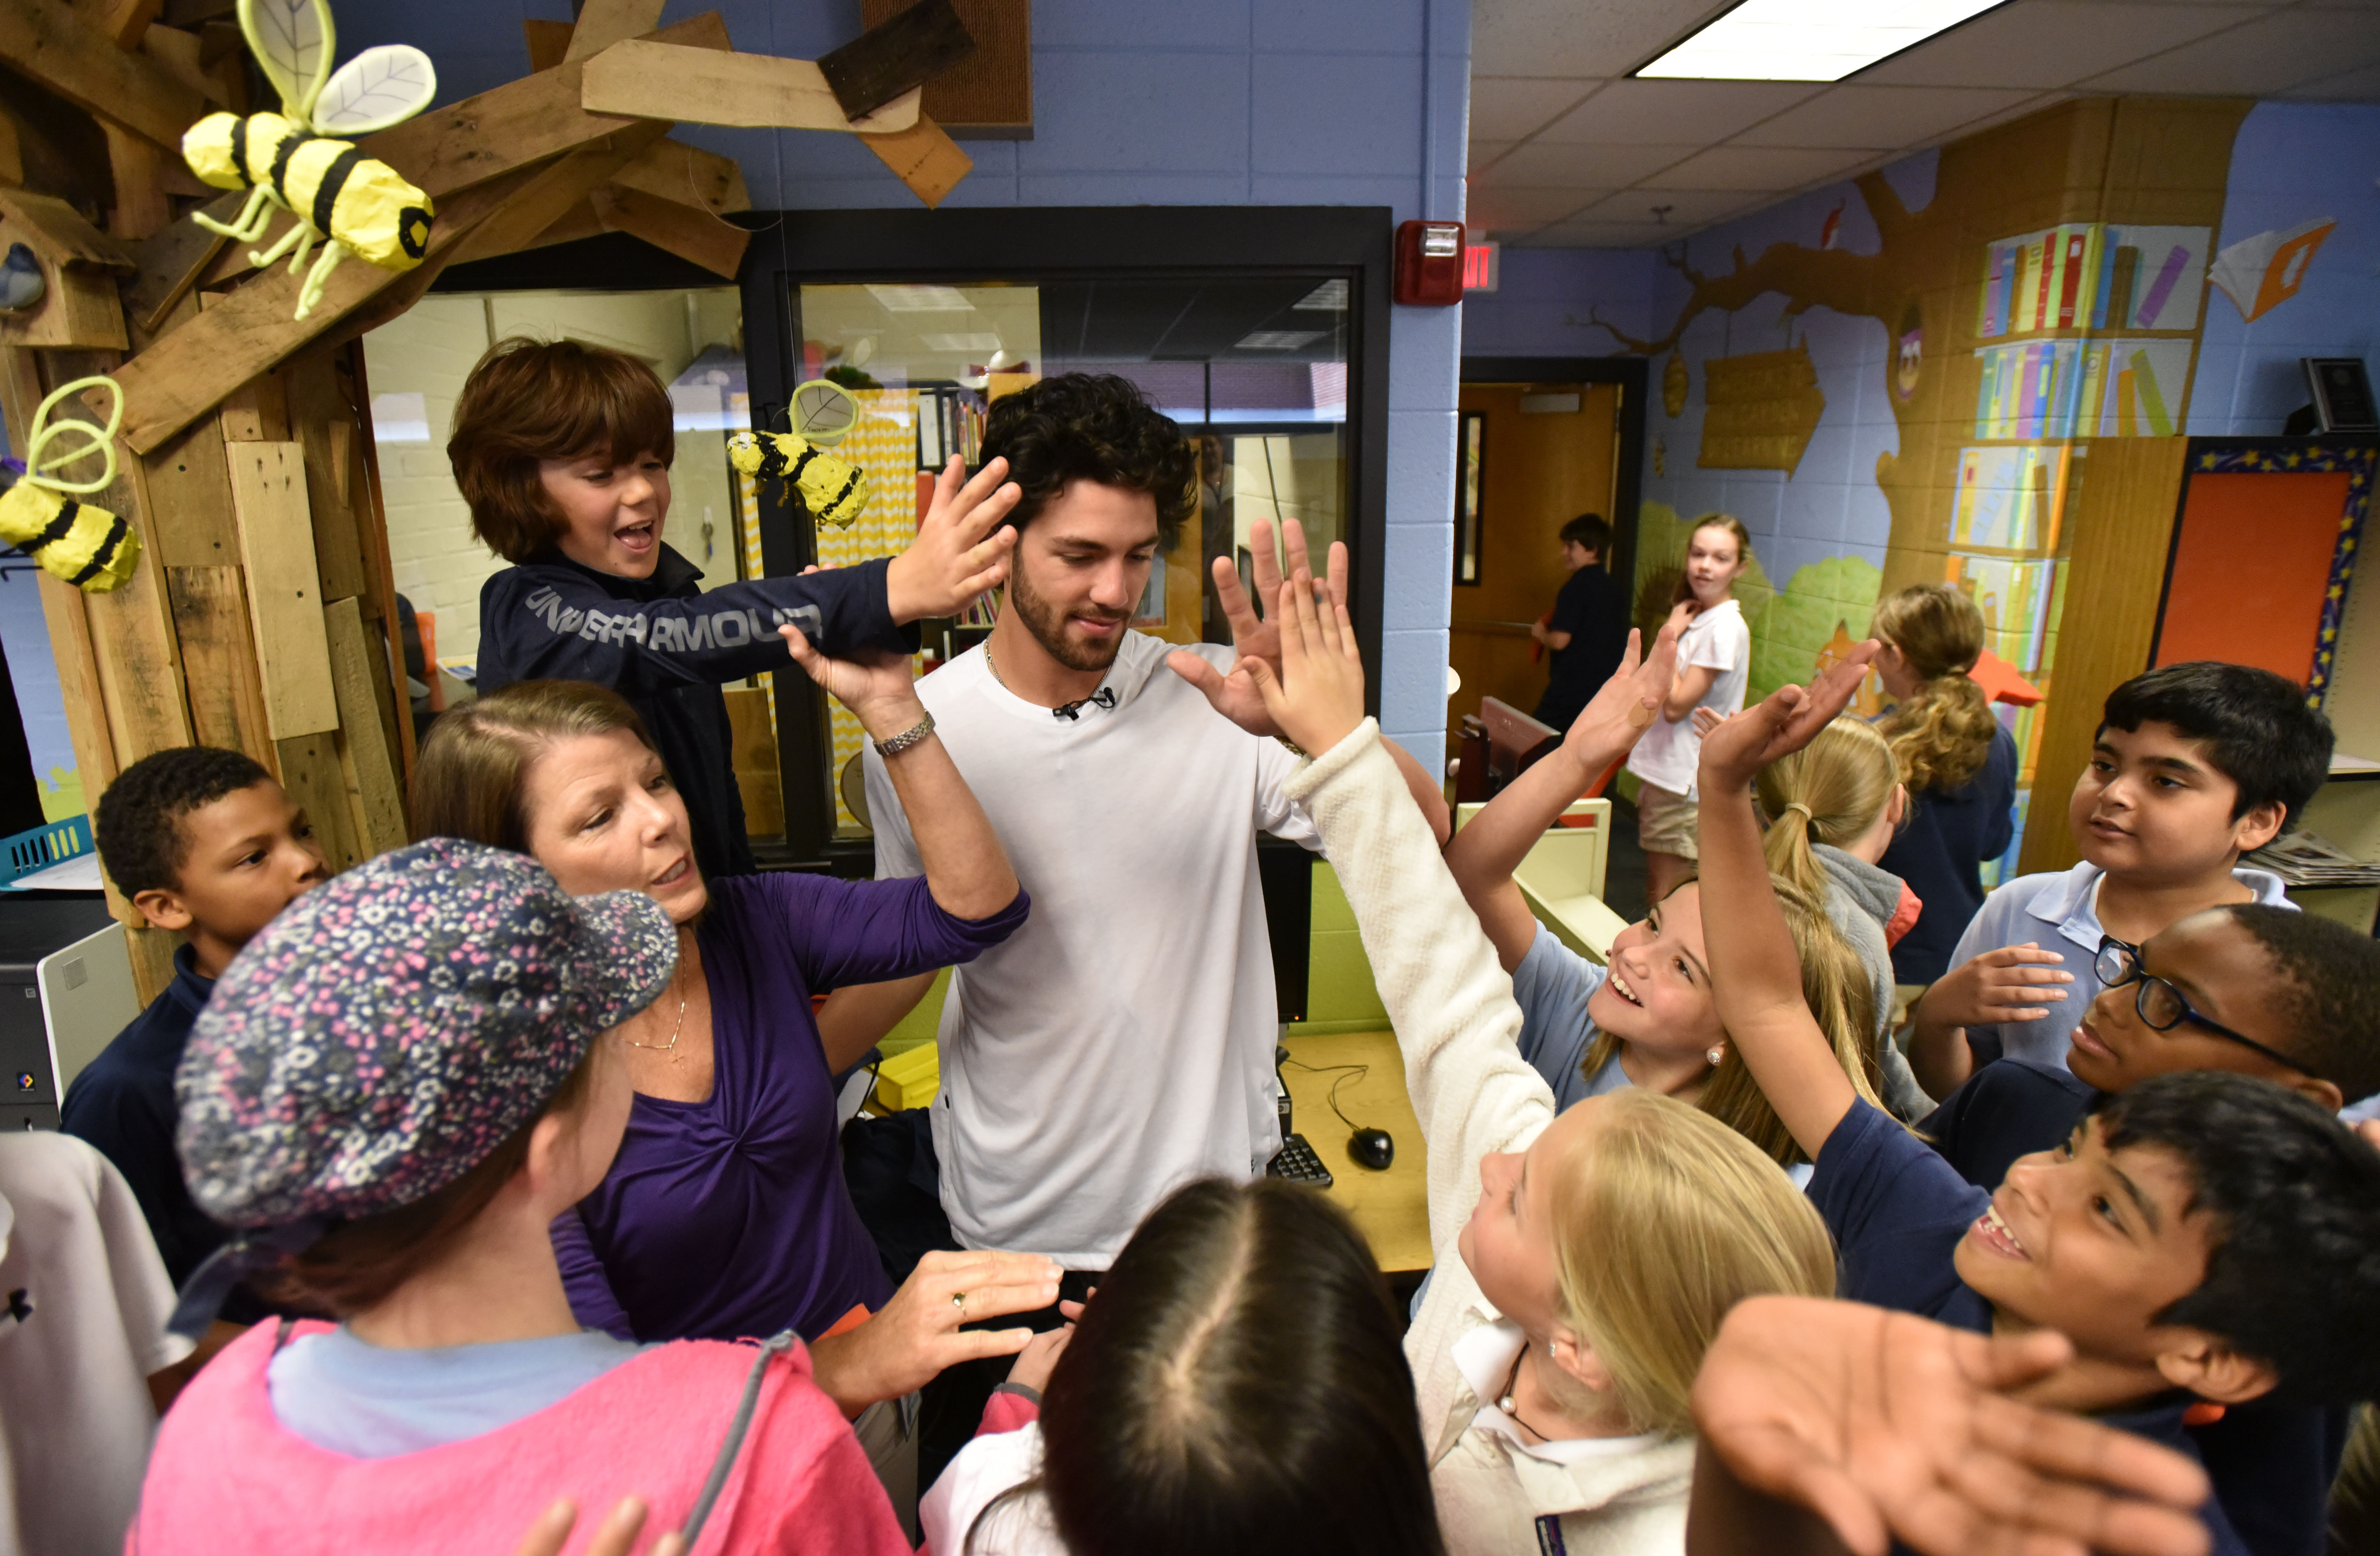 Photos: Dansby Swanson's surprise for mom